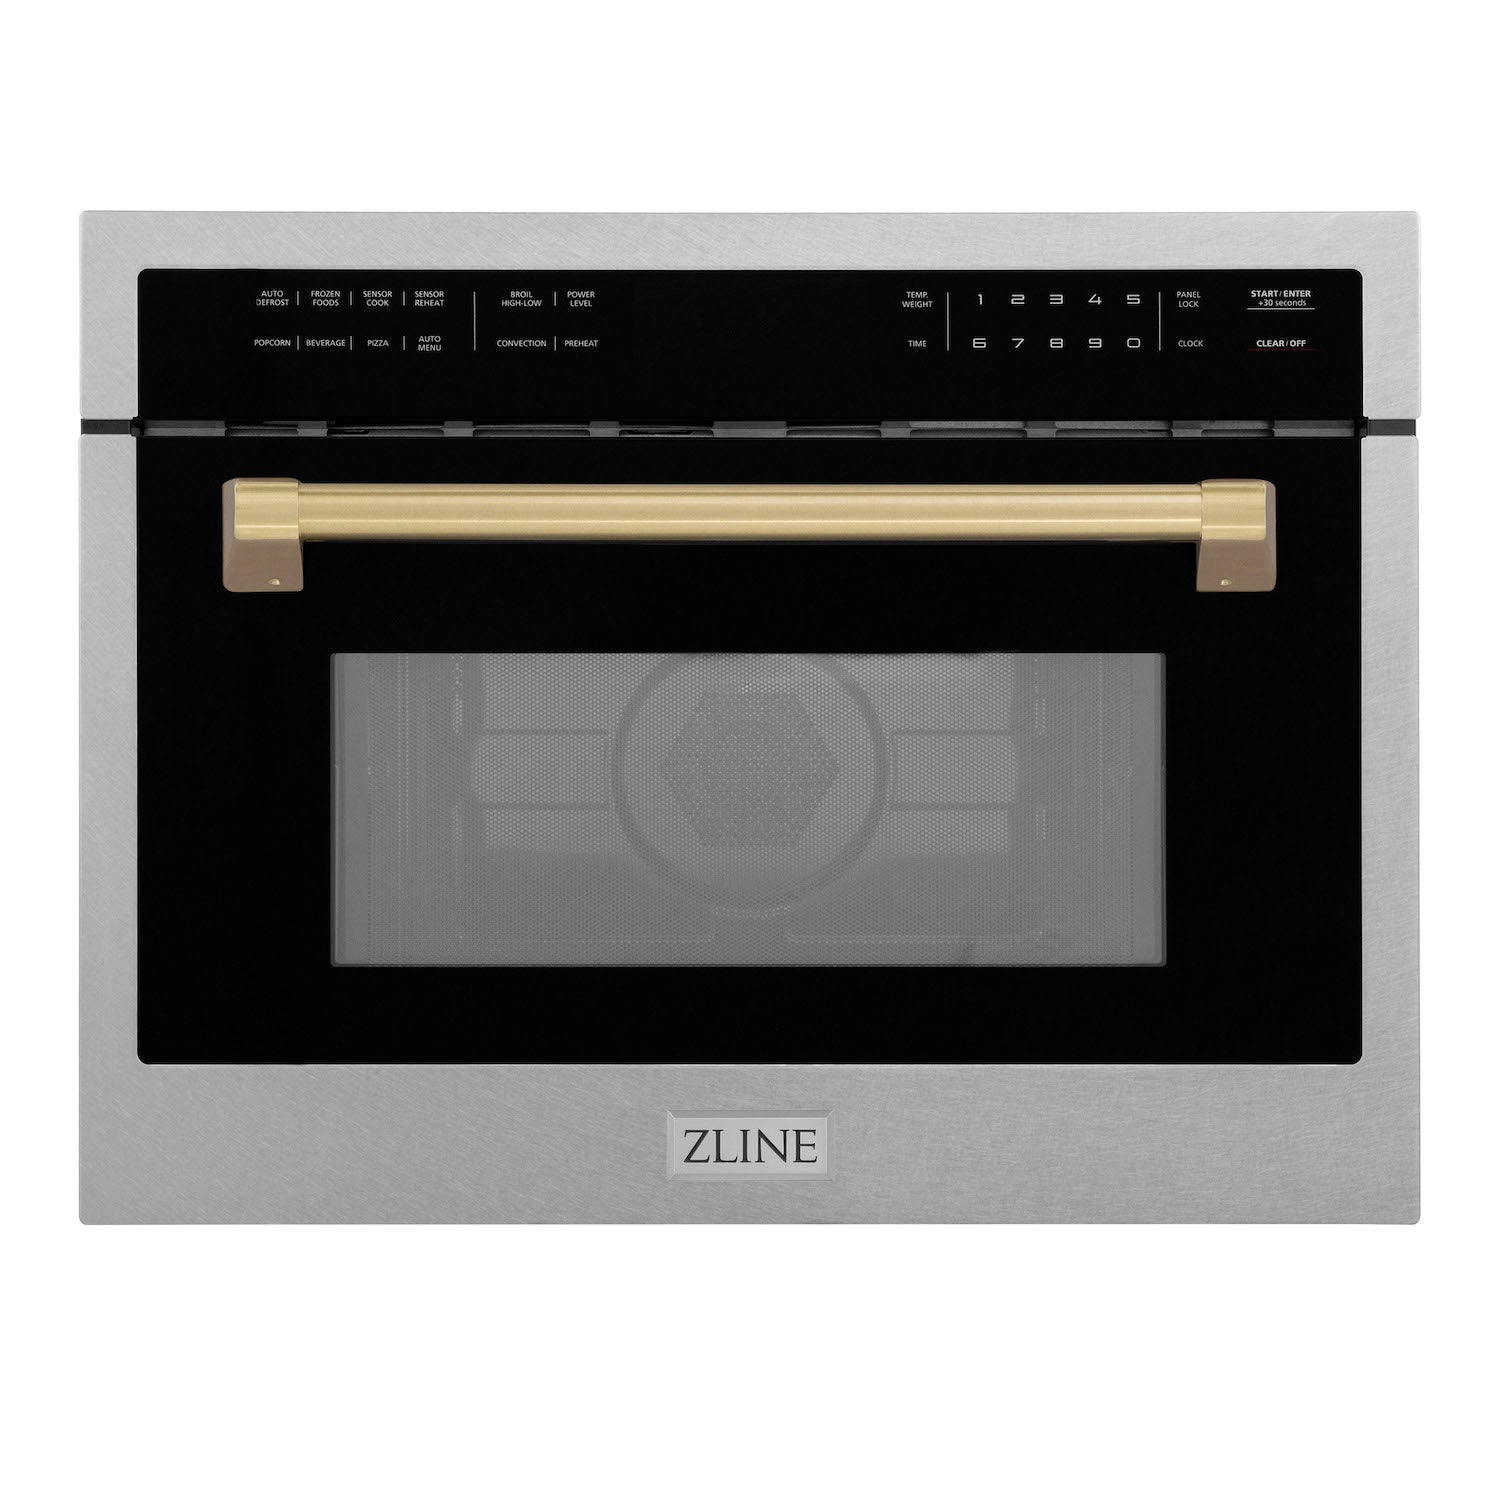 ZLINE Autograph Edition 24 in. 1.6 cu ft. Built-in Convection Microwave Oven in DuraSnow Stainless Steel with Champagne Bronze Accents